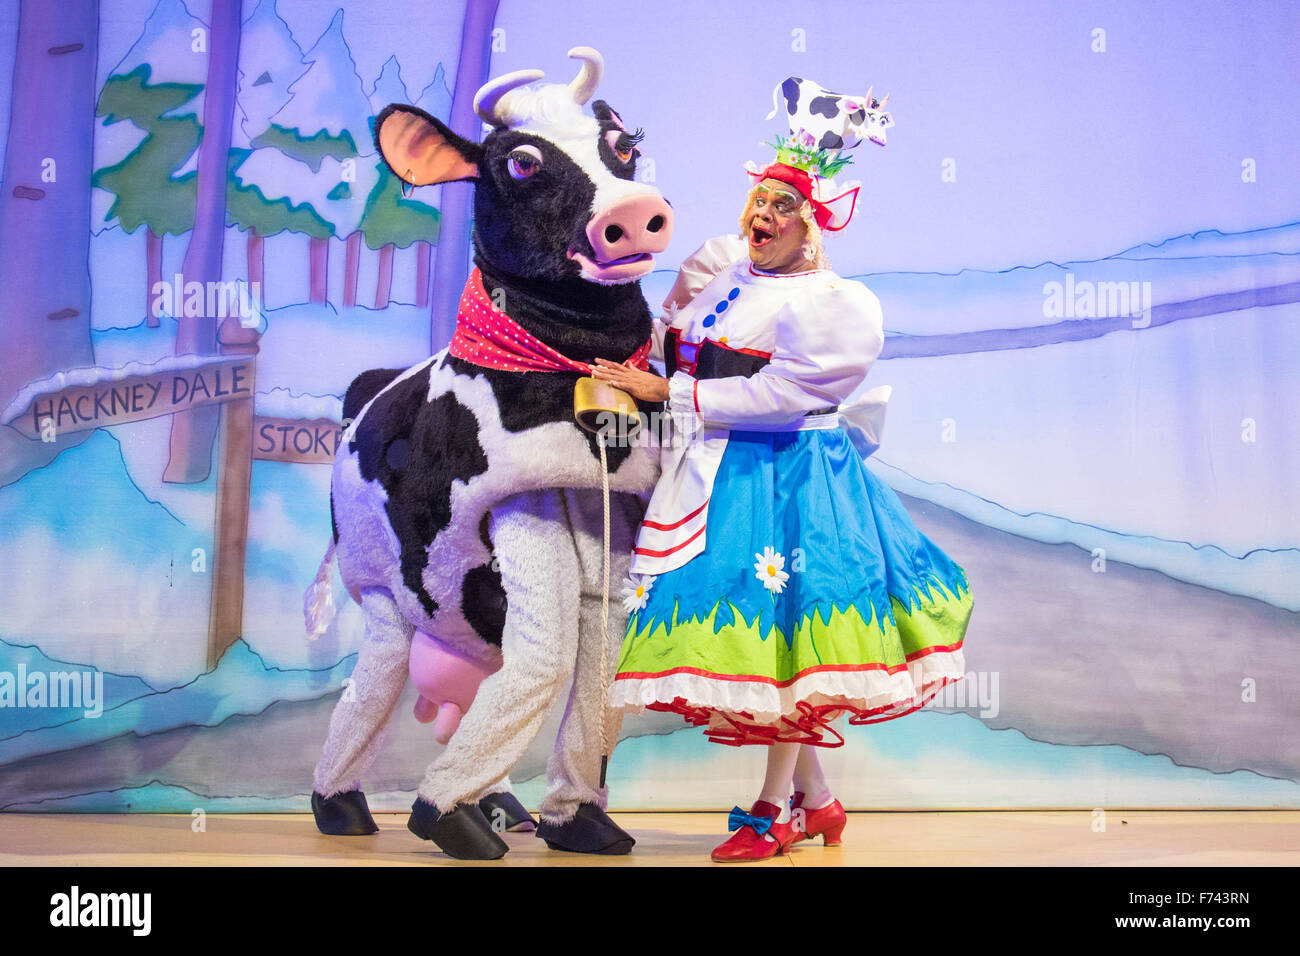 Hackney Empire Theatre, London, November 25th 2015.  Hackney Empire presents Jack and the Beanstalk as their 2015 Christmas pantomime. London’s most famous panto will star Hackney Empire’s own Olivier nominated dame Clive Rowe as Dame Daisy Trott, Olivier Award-nominated Bodyguard actress Debbie Kurup as Jack and Hackney Panto favourite Kat B as Snowman. Written and directed by Creative Director Susie McKenna, with music by Steven Edis. PICTURED: Clive Rowe as Dame Daisy Trott with Cow. Stock Photo